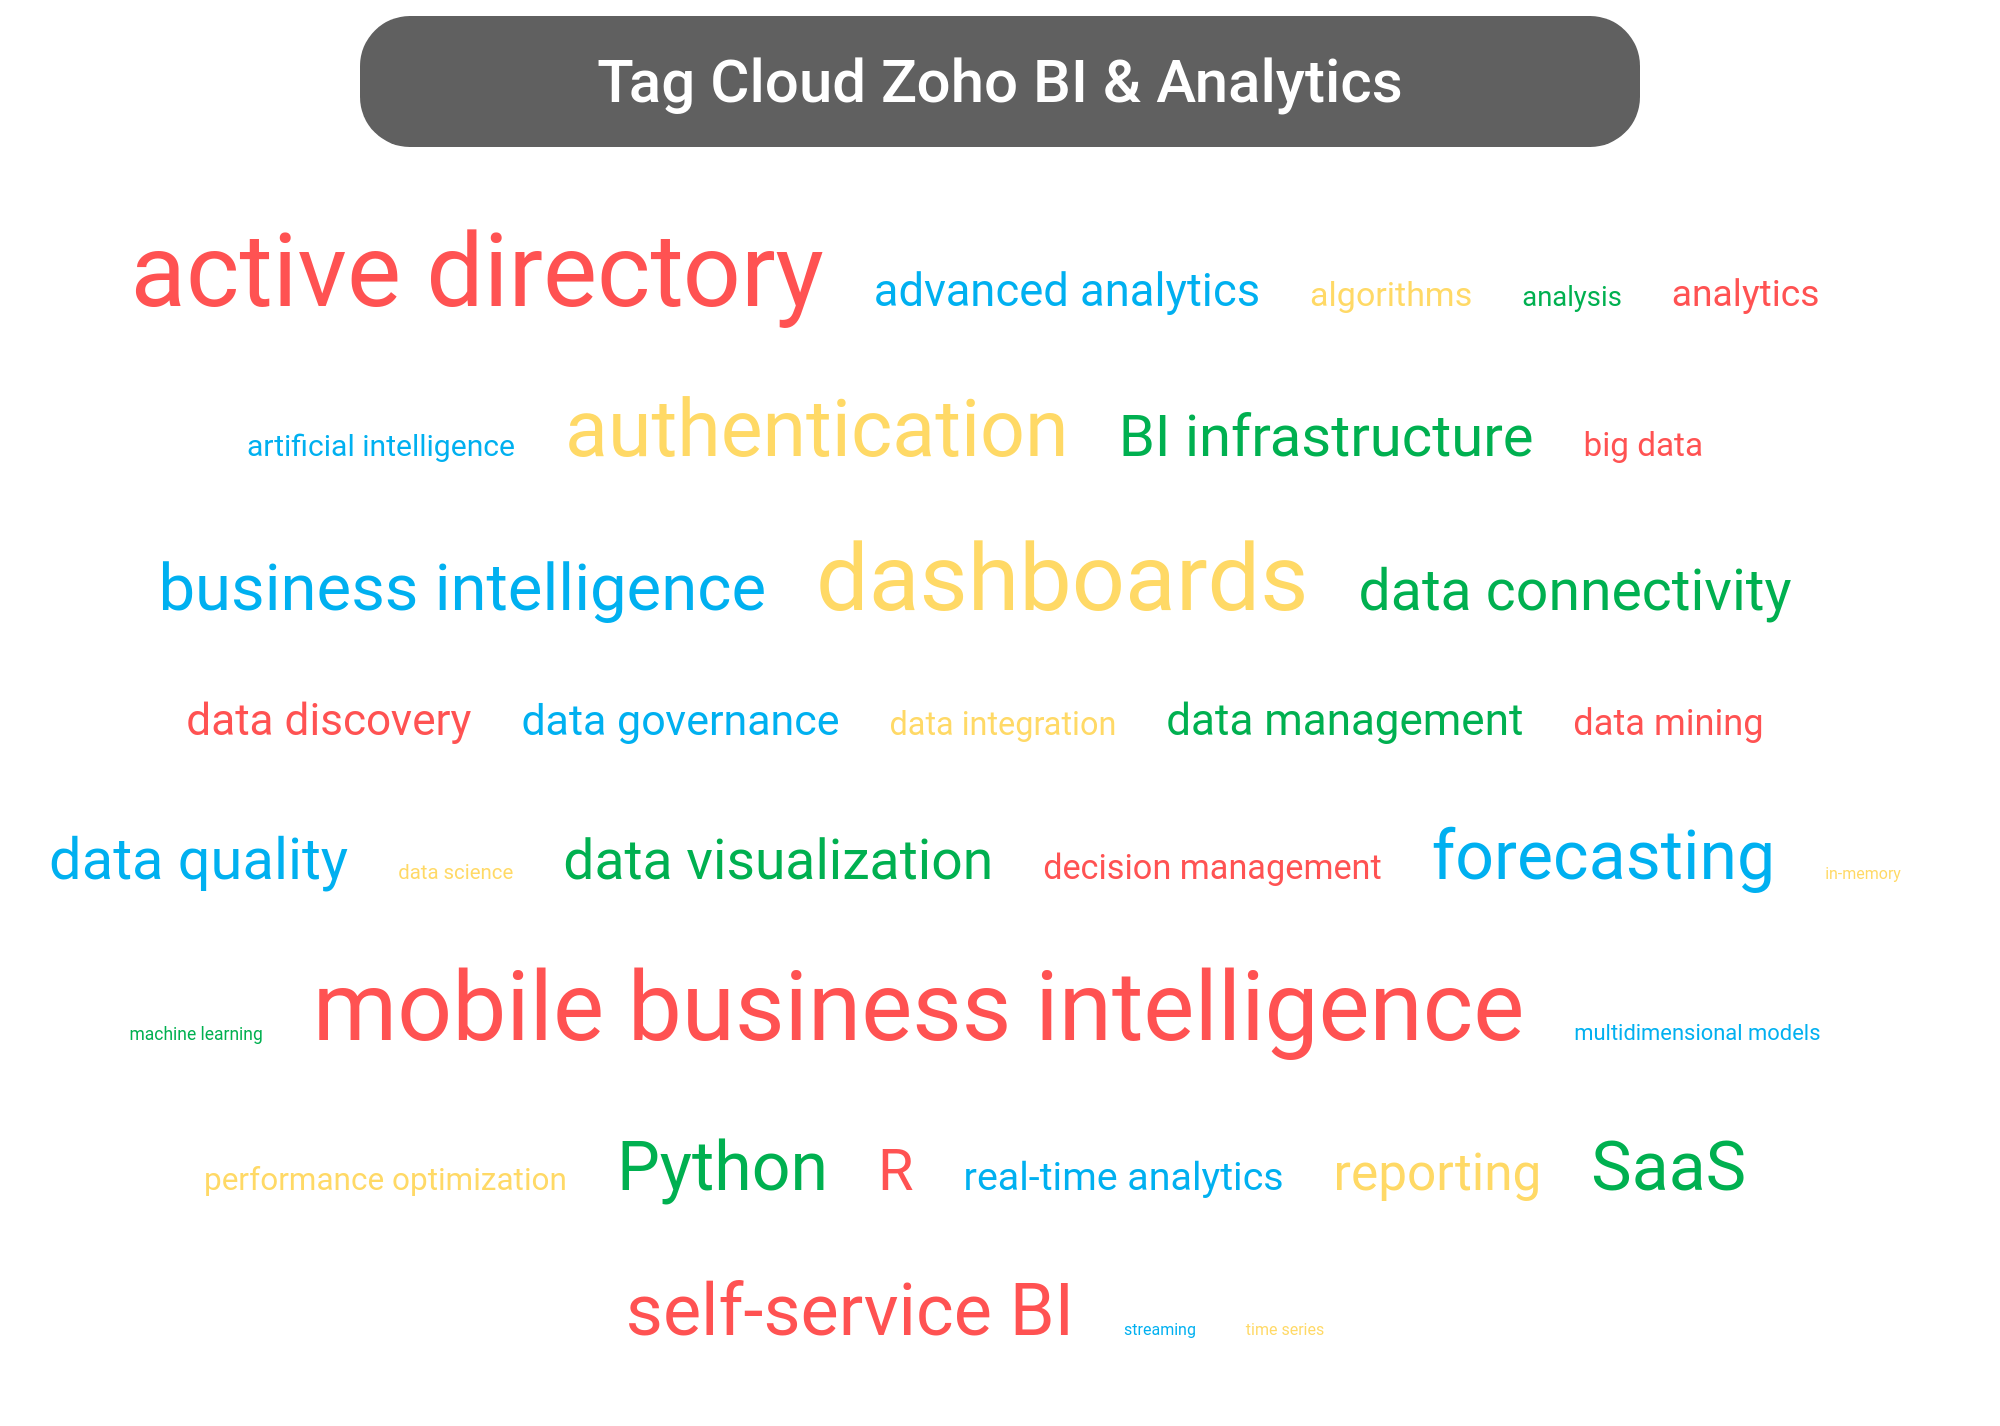 Tag cloud of the Zoho Analytics tools.